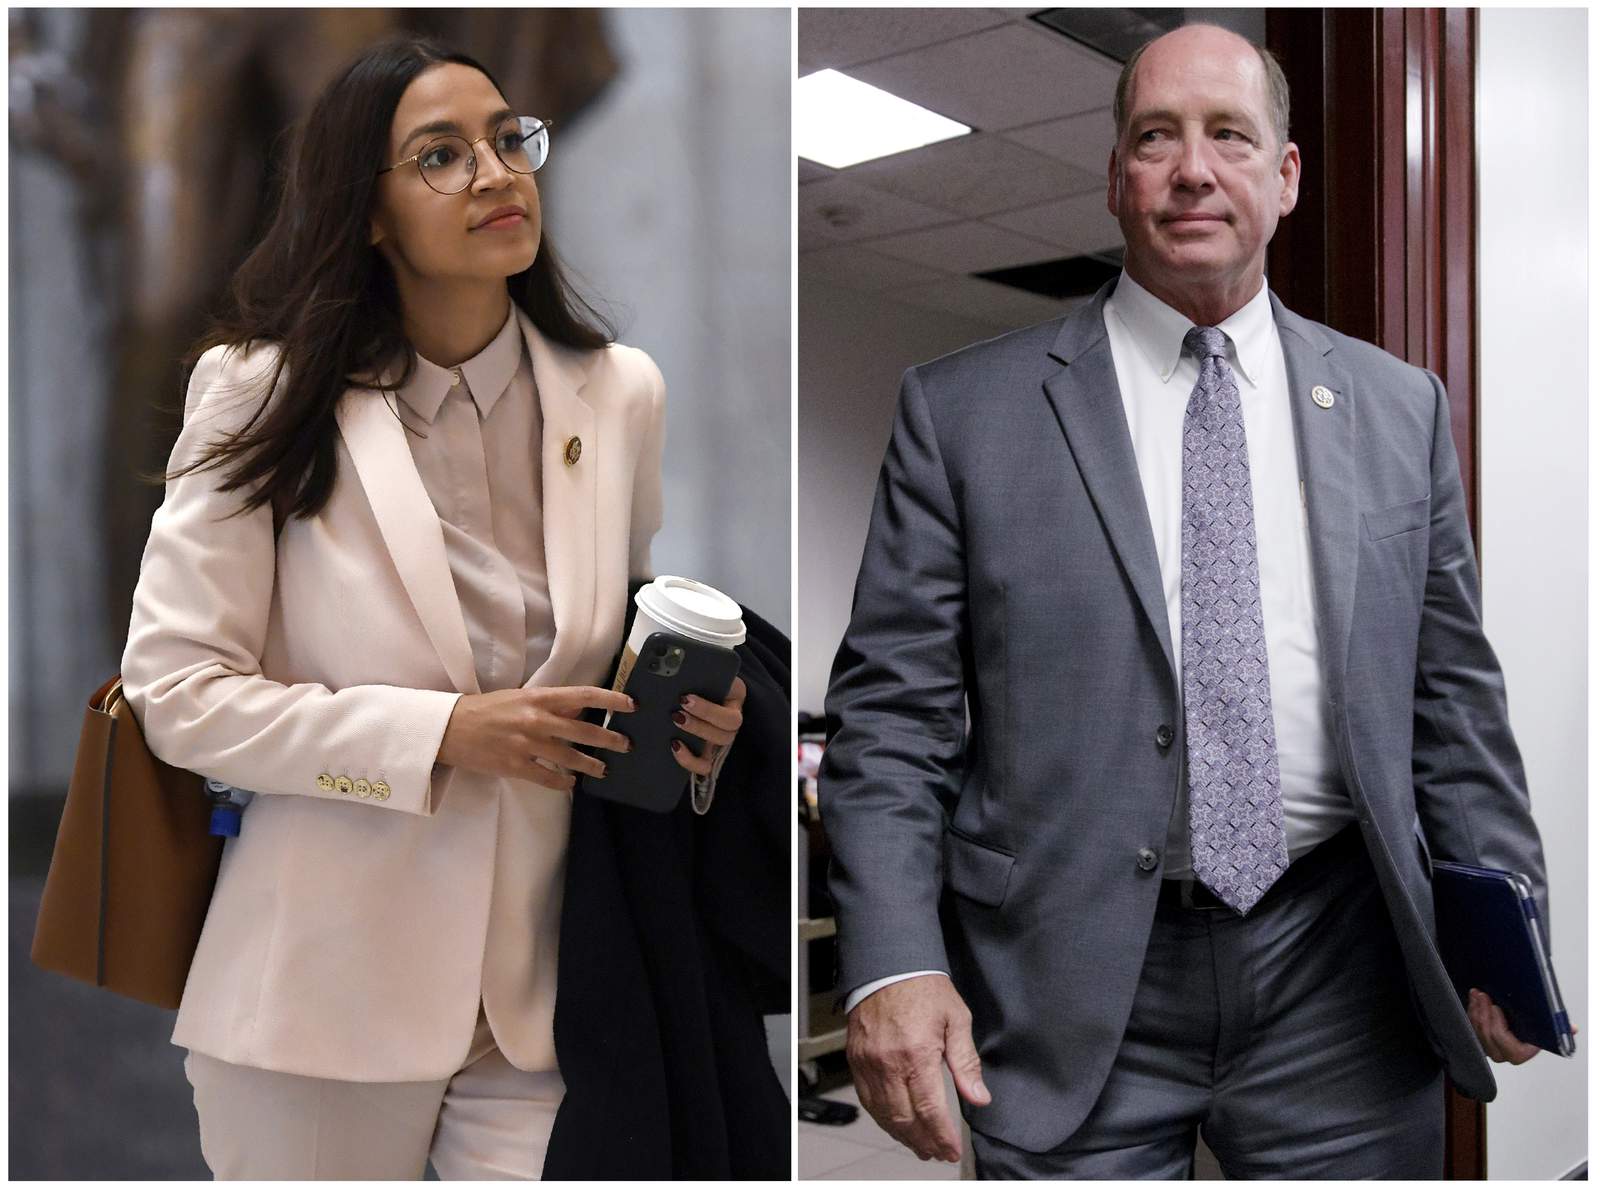 Apology demanded from GOP lawmaker for Ocasio-Cortez remark